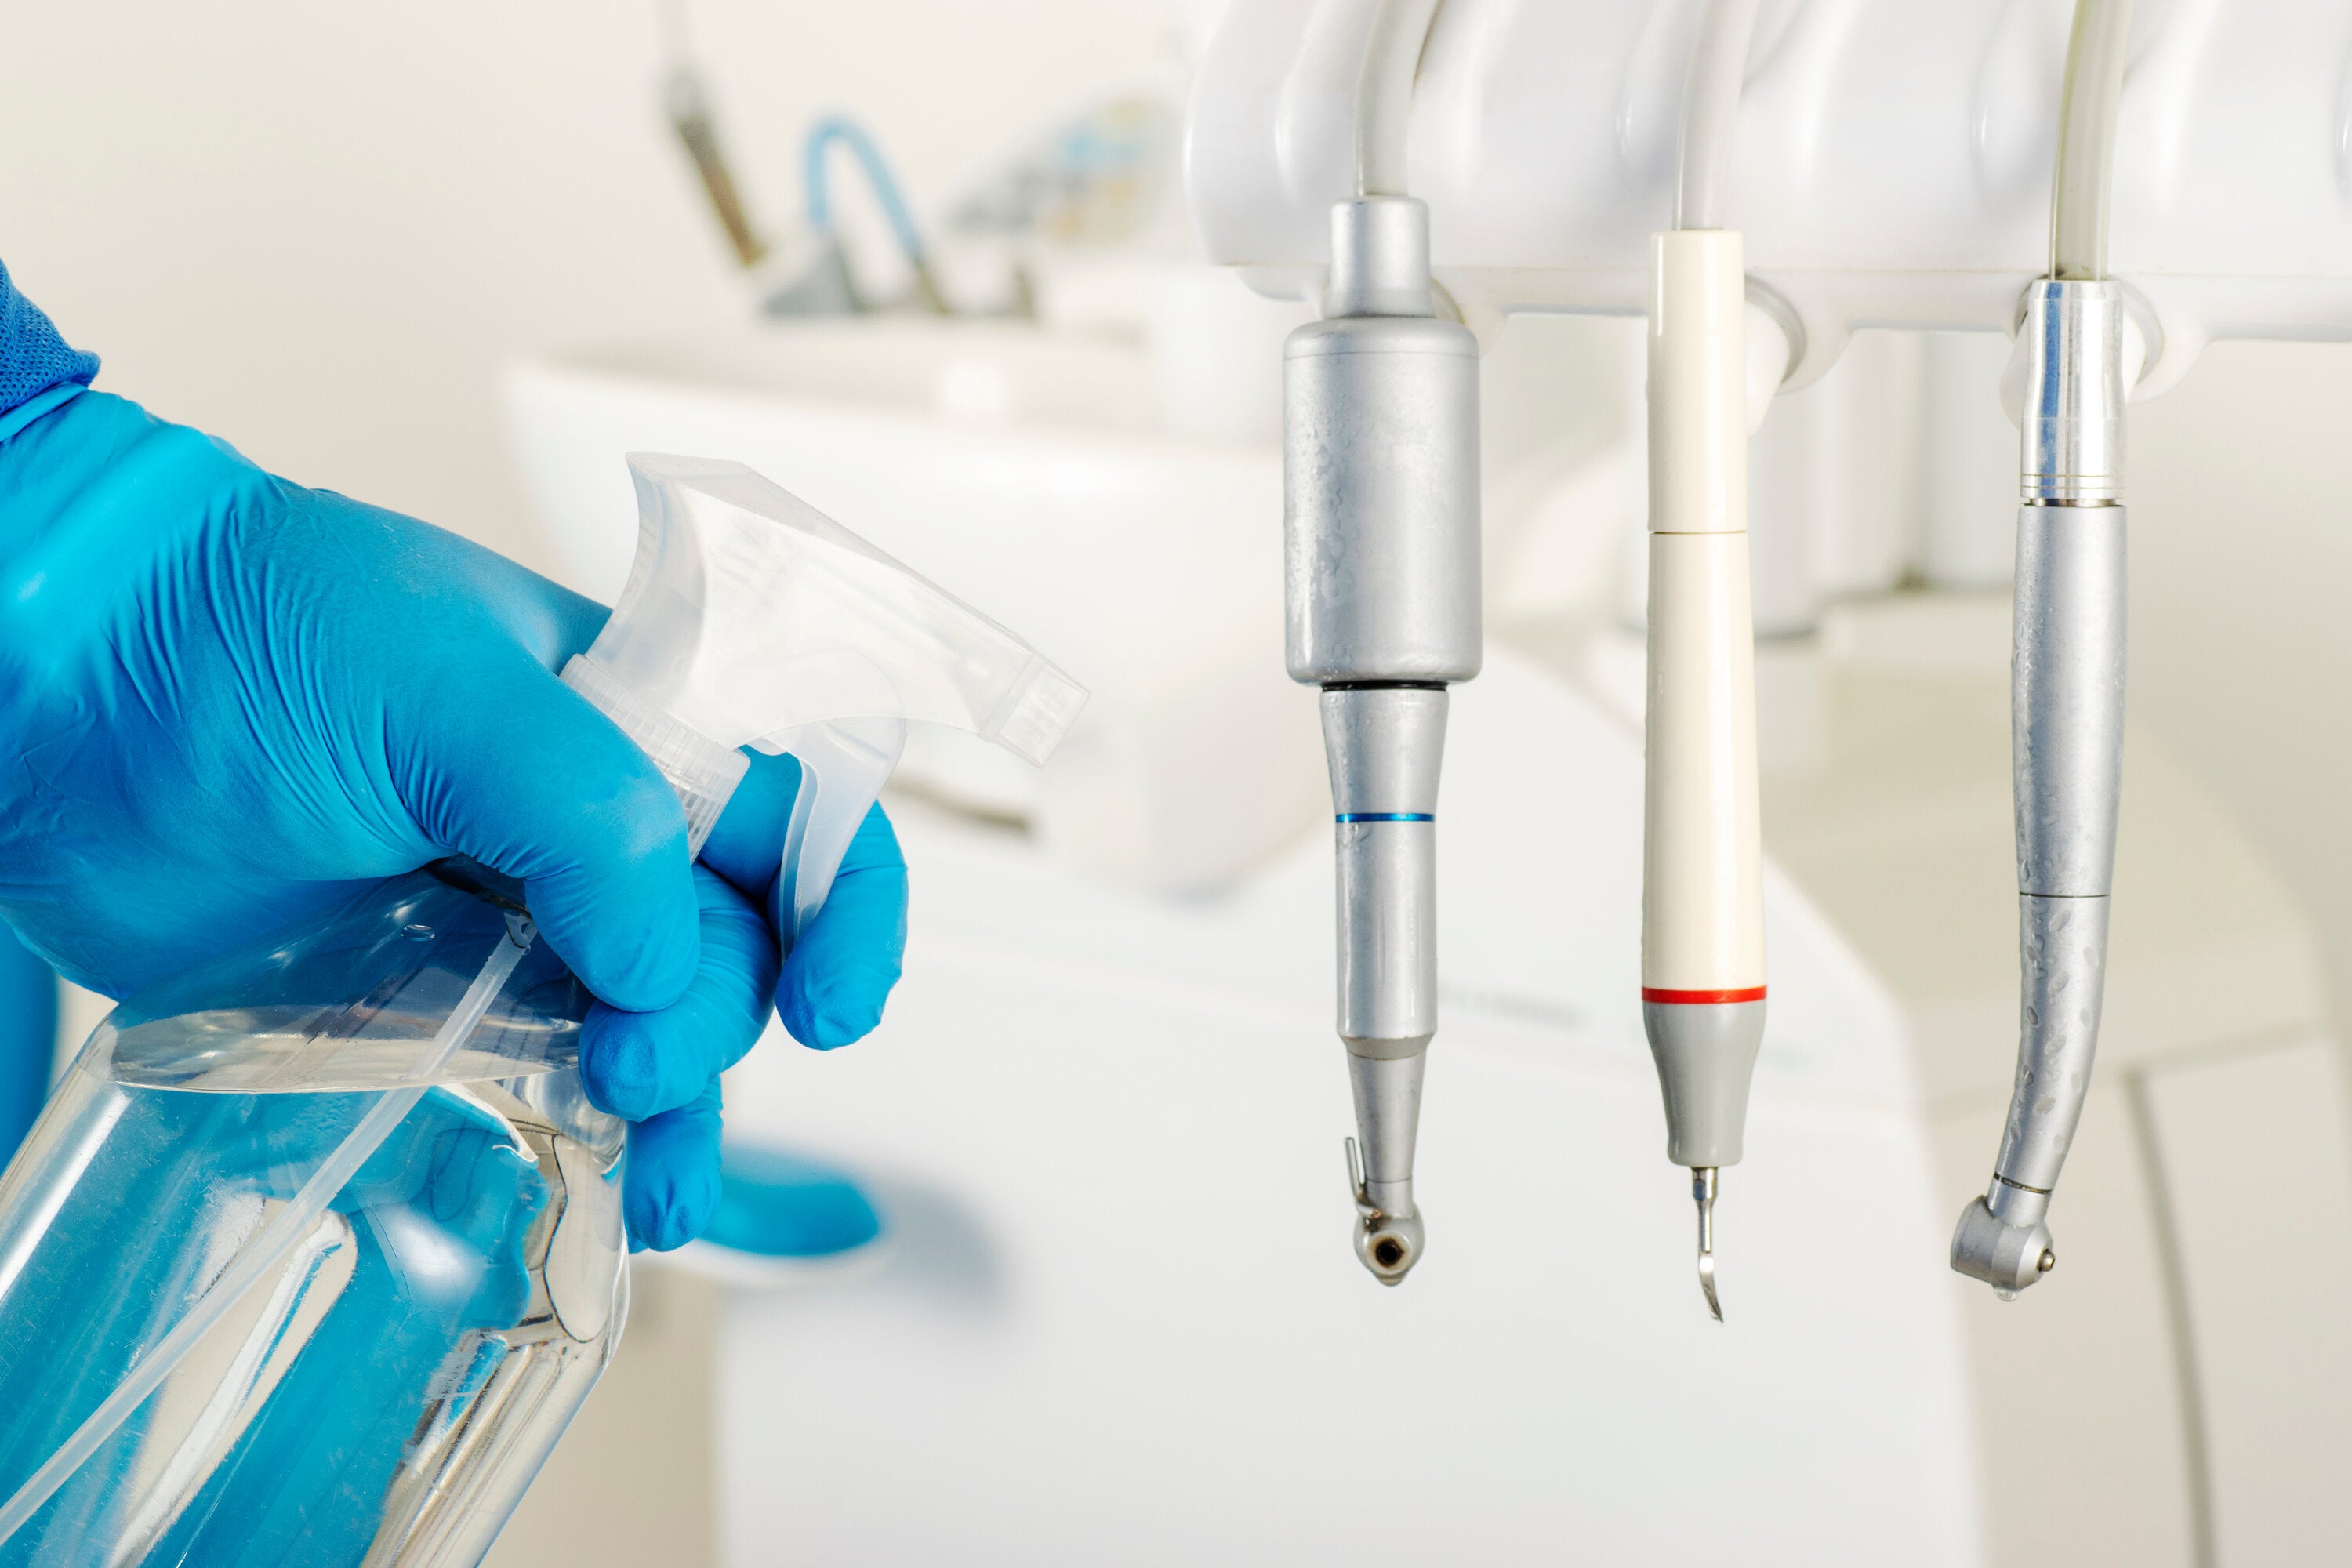 Dental Chair Hygiene: How to Keep Your Patient and Equipment Safe